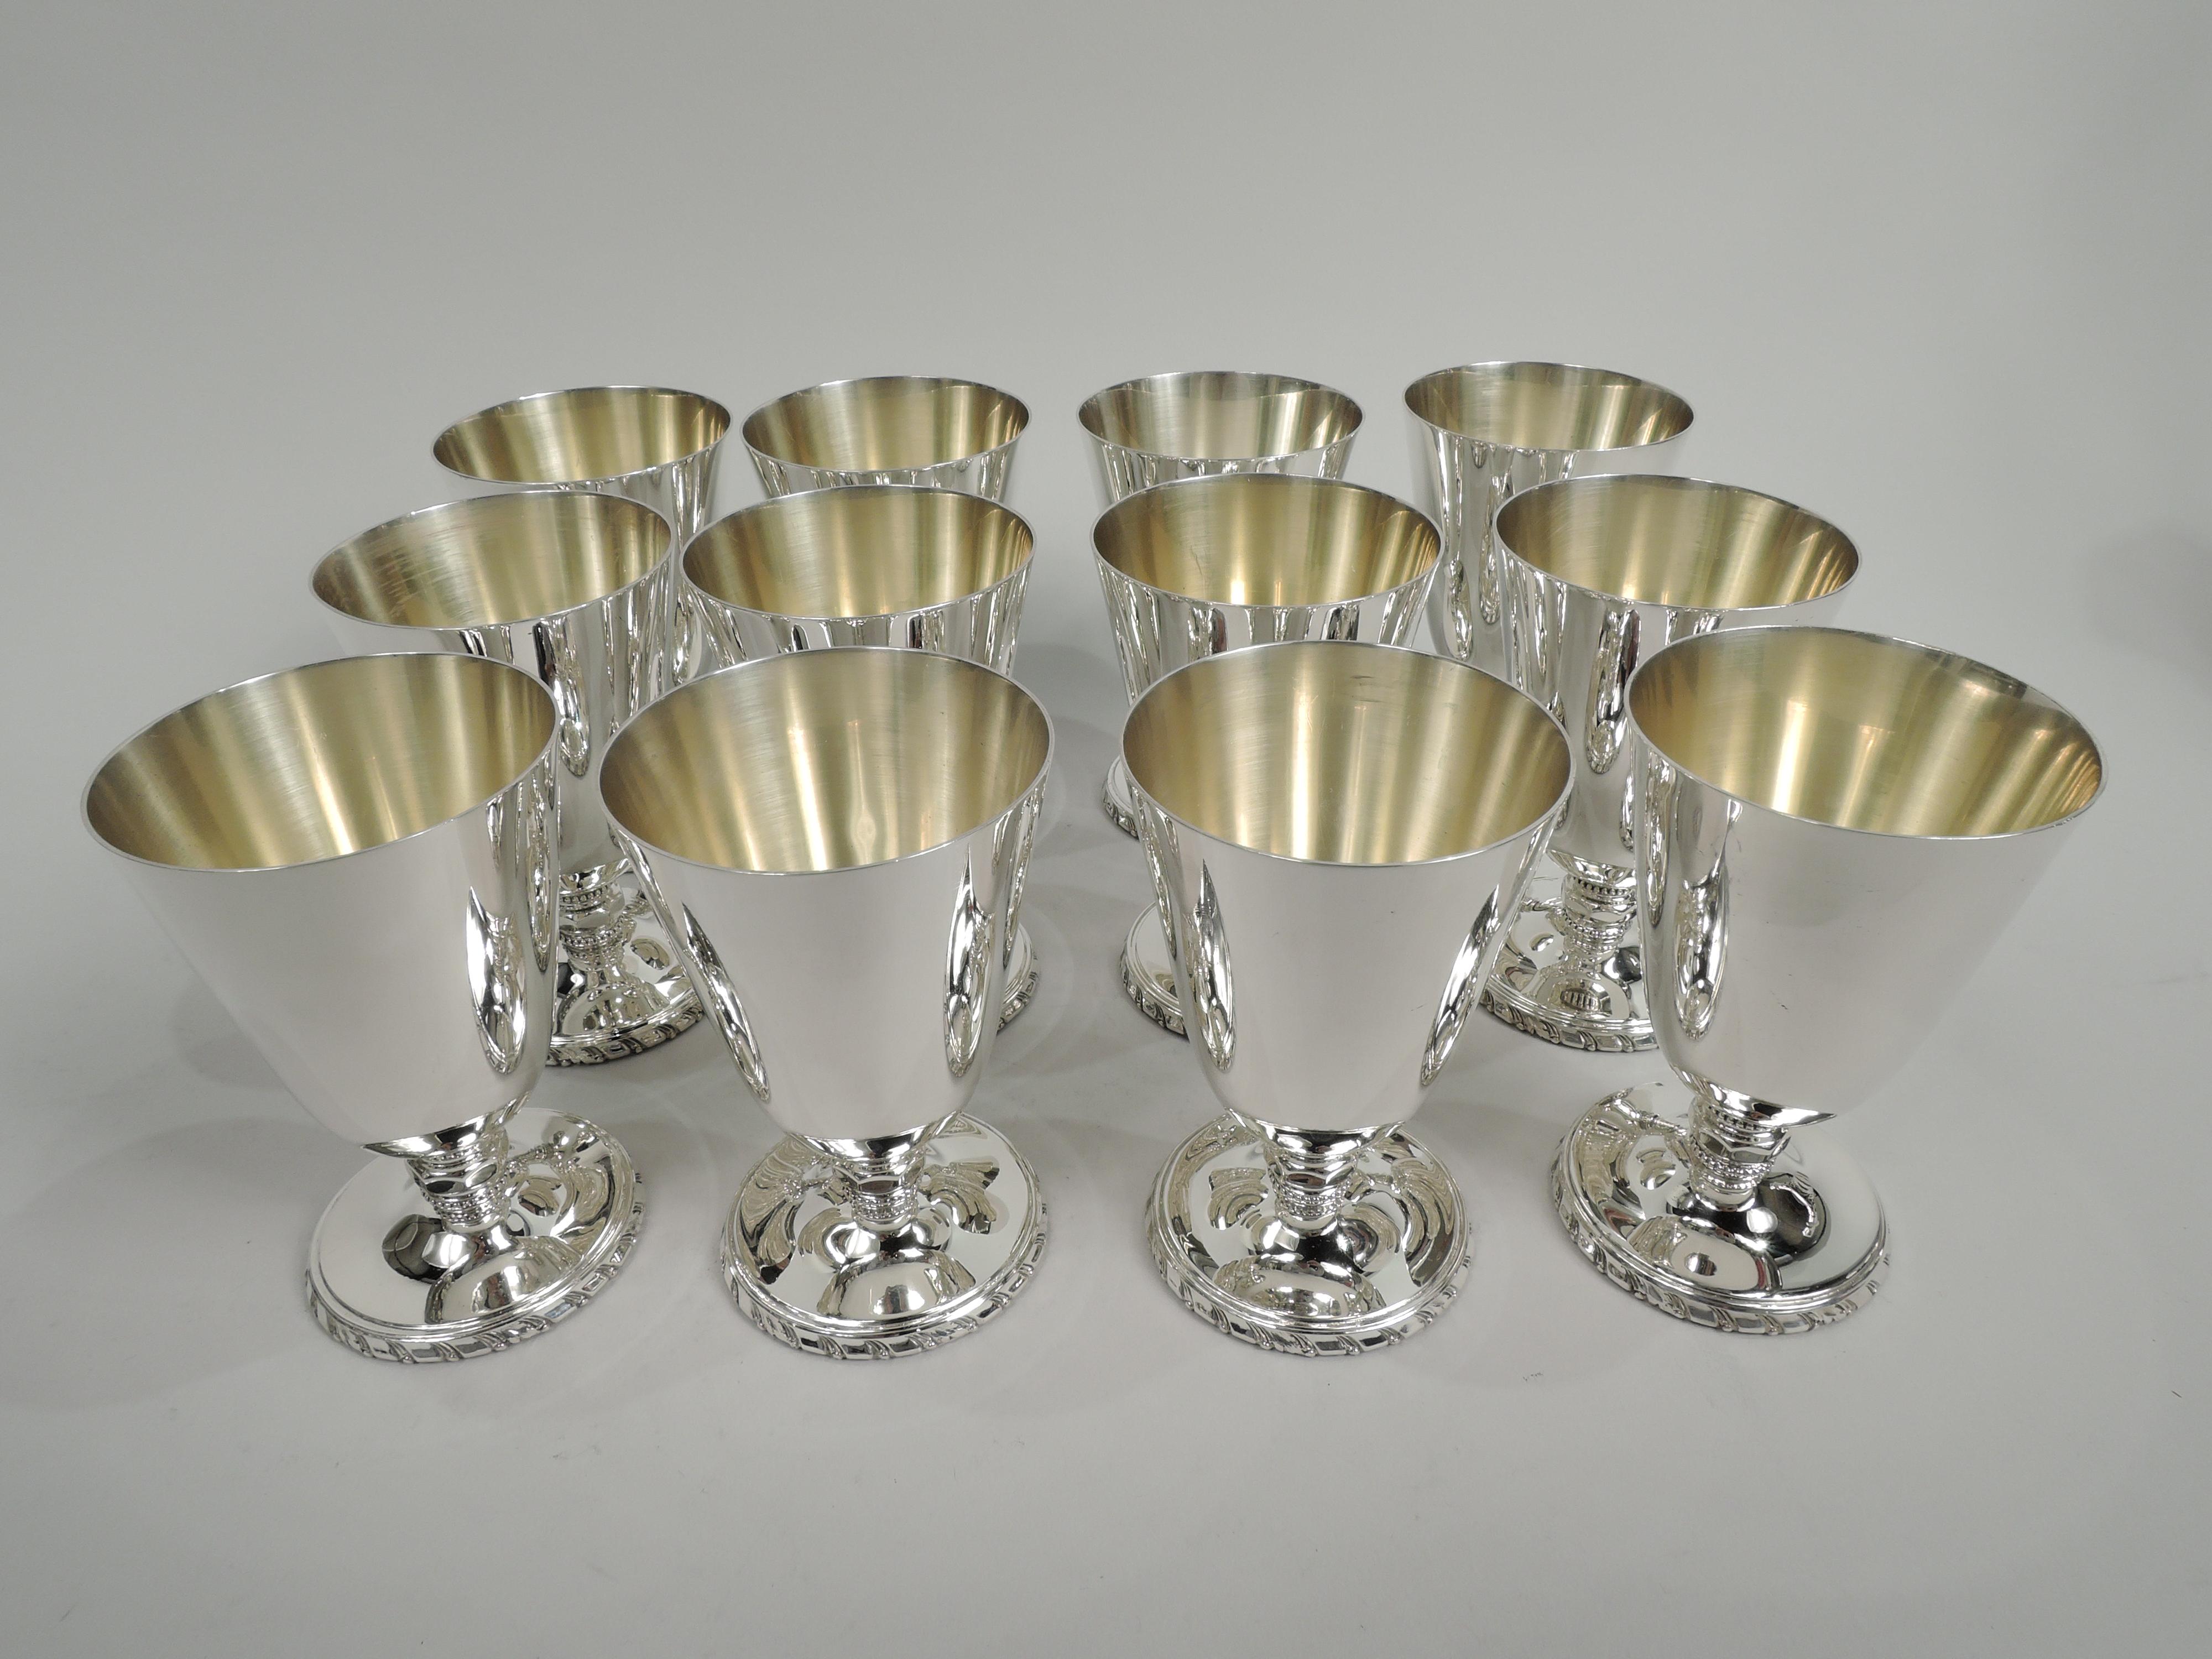 Set of 12 Mid-Century Modern Classical sterling silver aperitif cups. Retailed by Cartier in New York. Conical bowl on short stem with faceted knop between beaded bands; foot gently raised with gadrooned rim. Bowl interior gilt washed. Fully marked